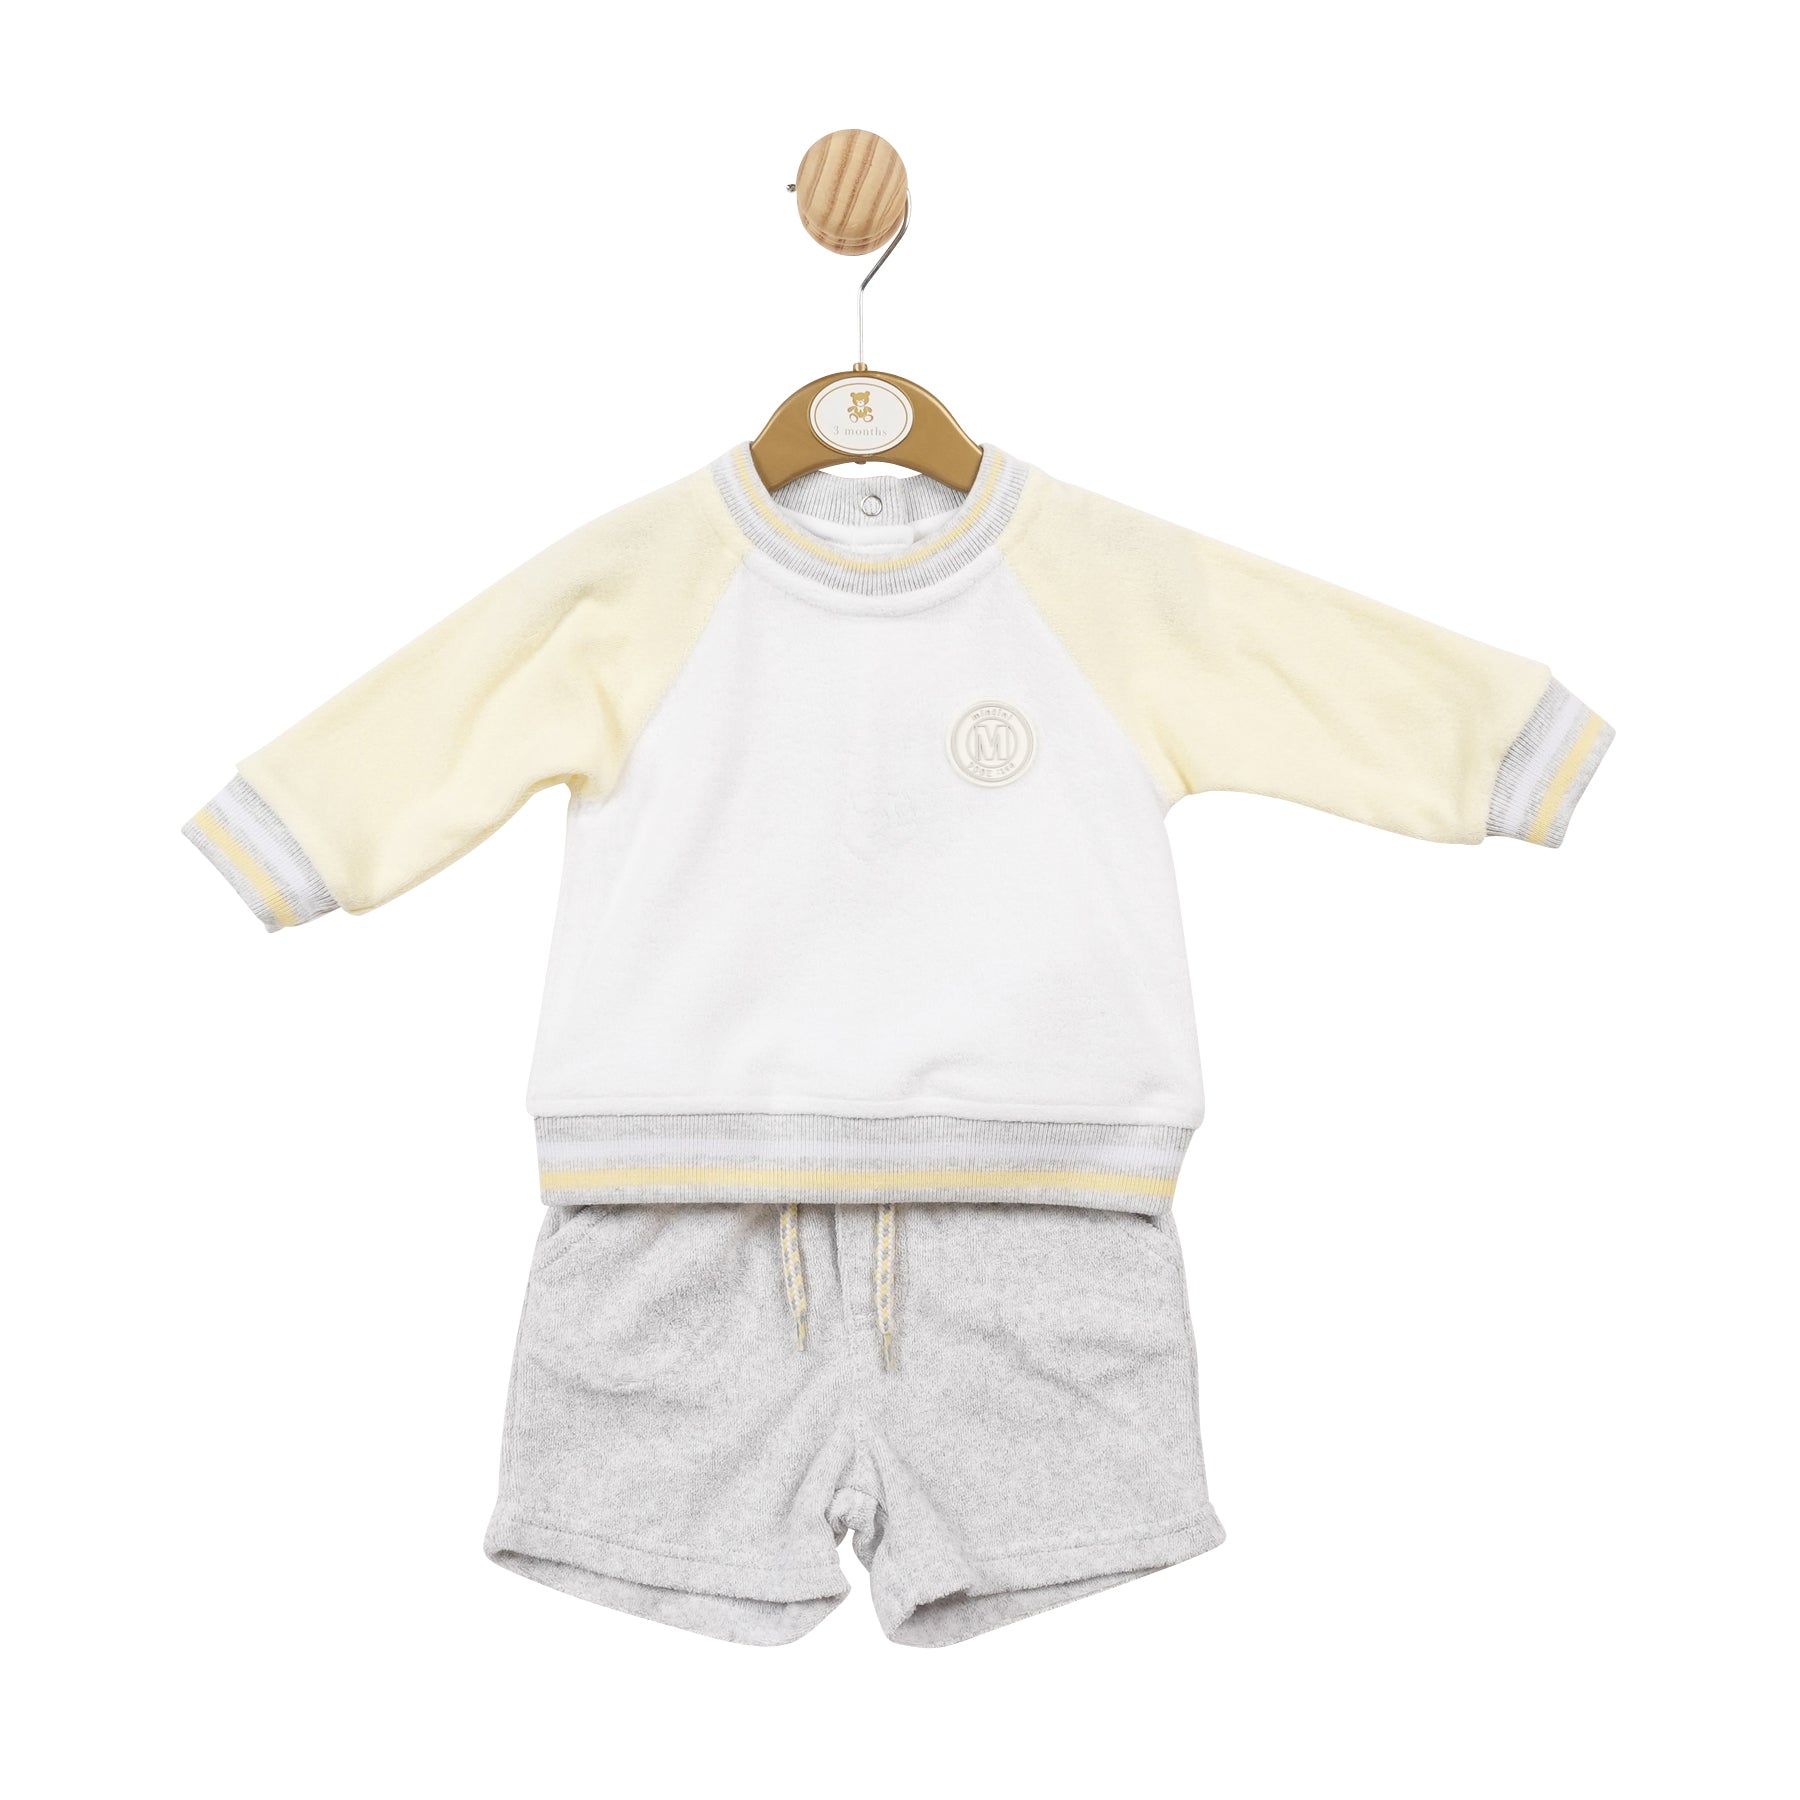 <p>Introducing our boys white, lemon & grey sweatshirt and shorts Set from Mintini Baby's spring summer collection. This two piece set includes a round neck sweatshirt with white and lemon colourblock sleeves and grey shorts to match. Available in sizes 3 months to 24 months. Perfect for your little ones to stay stylish and comfortable this season.</p>